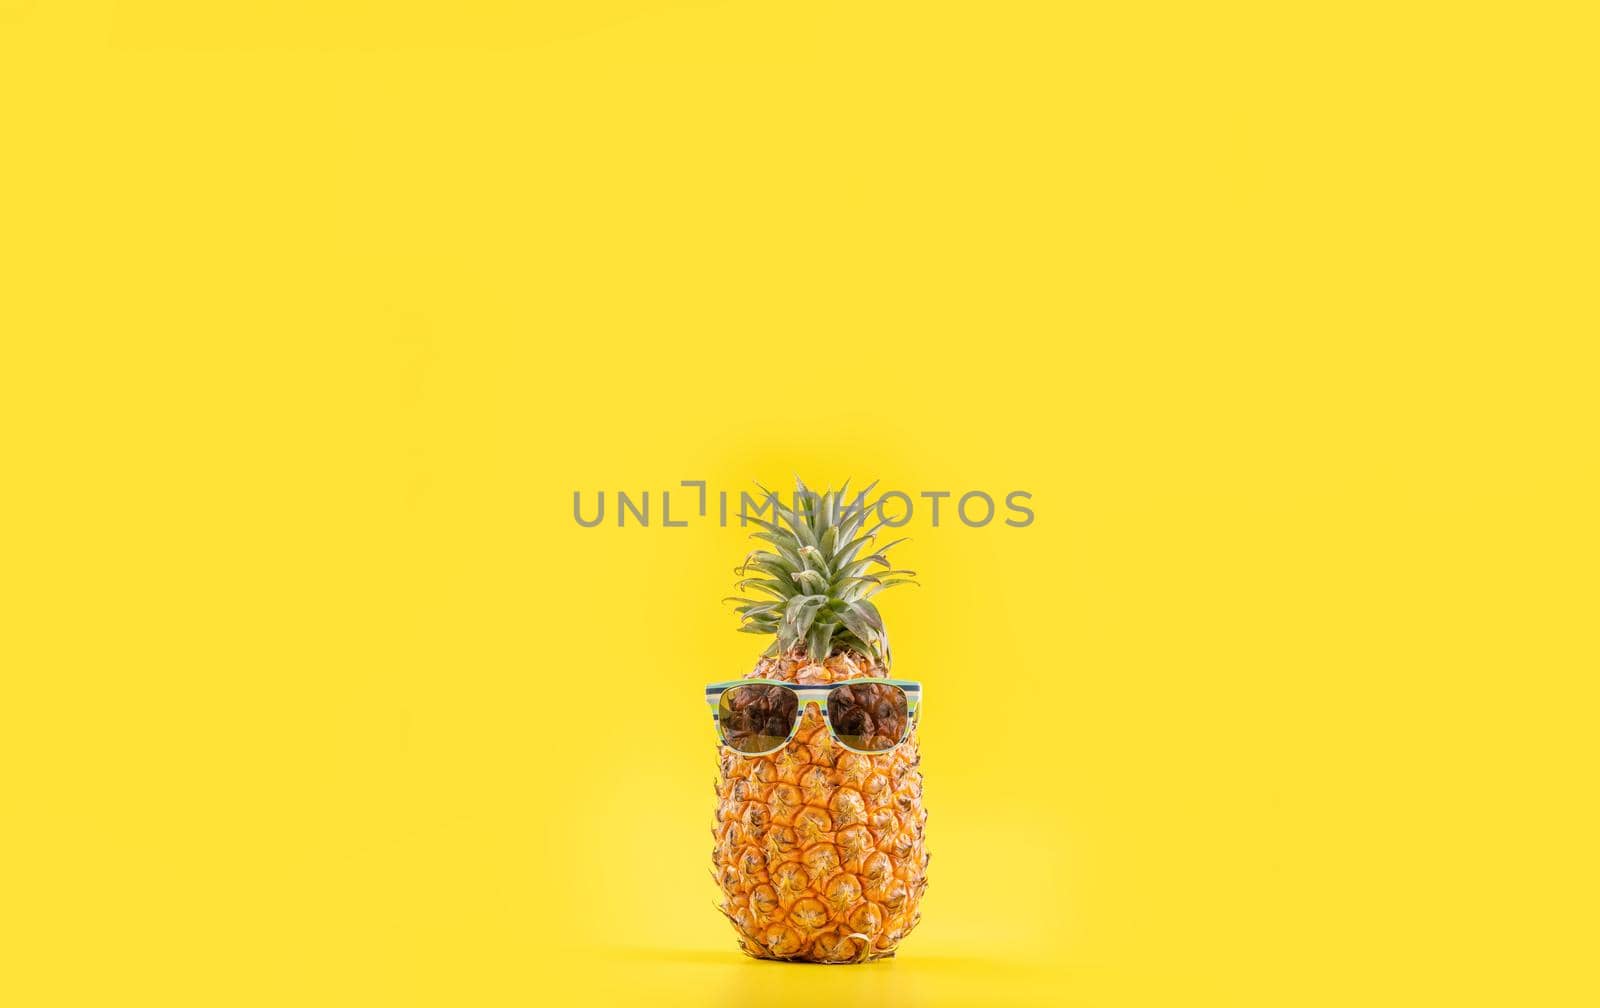 Creative pineapple looking up with sunglasses and shell isolated on yellow background, summer vacation beach idea design pattern, copy space close up by ROMIXIMAGE